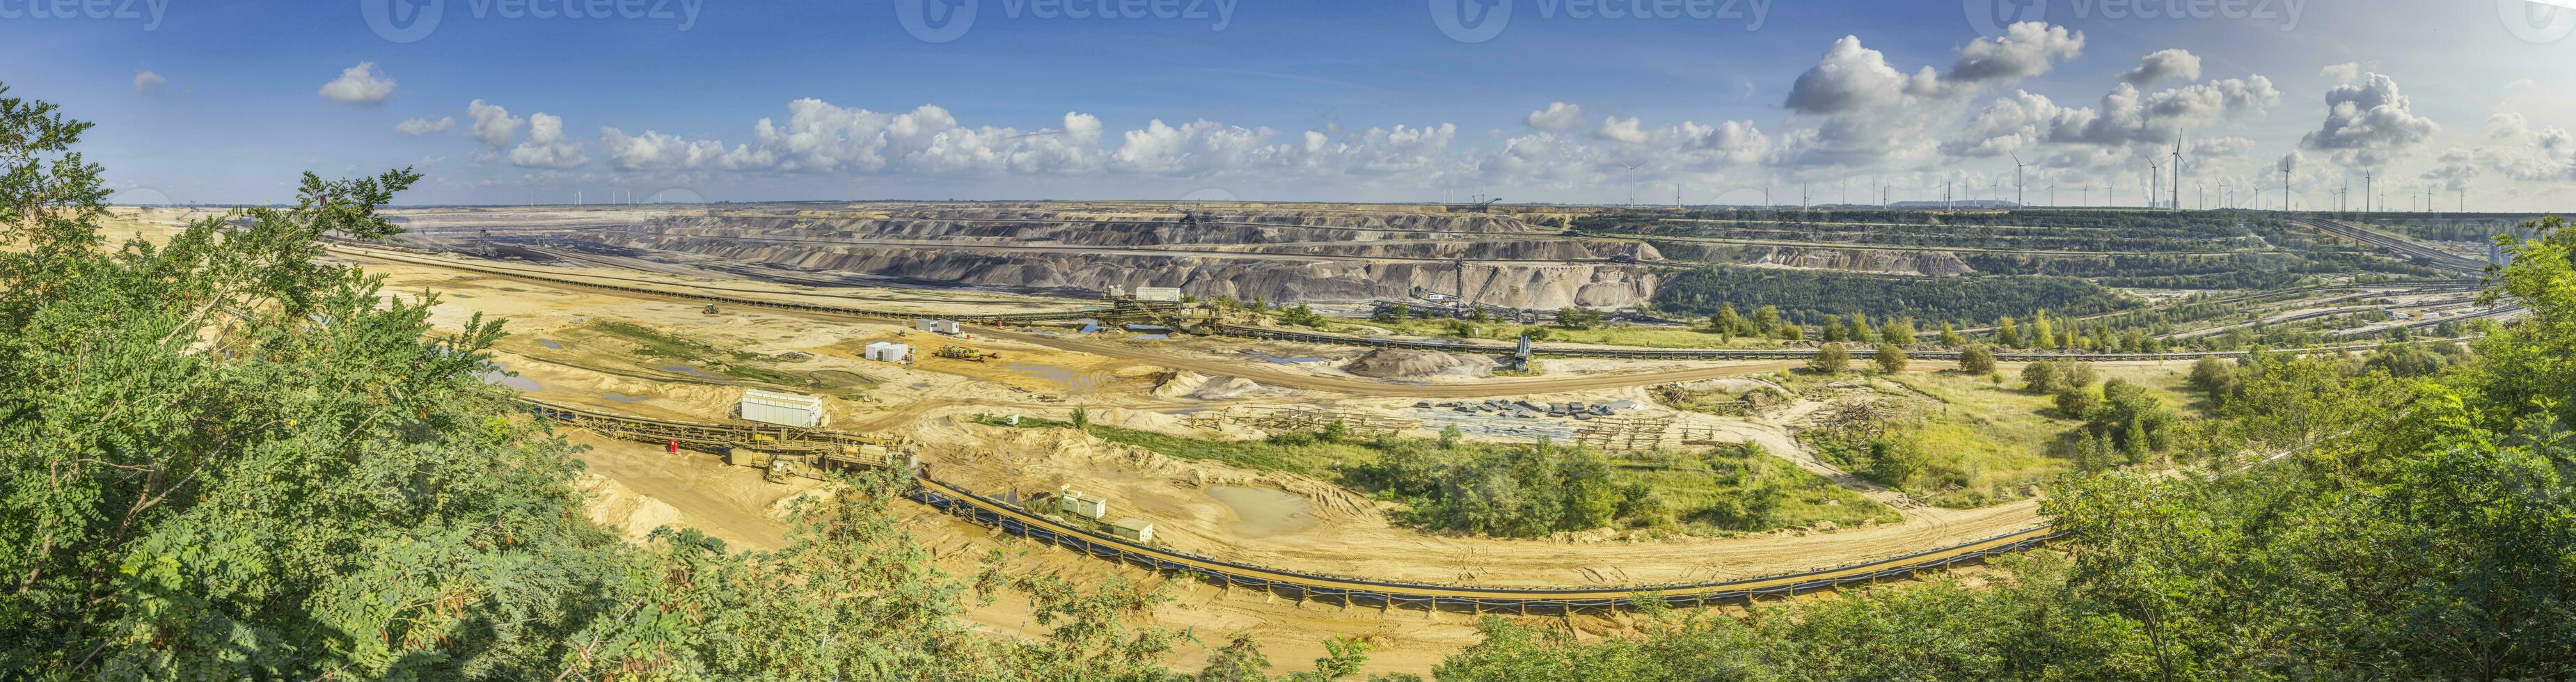 Panoramic image of the Garzweiler opencast coal mine in Germany photo